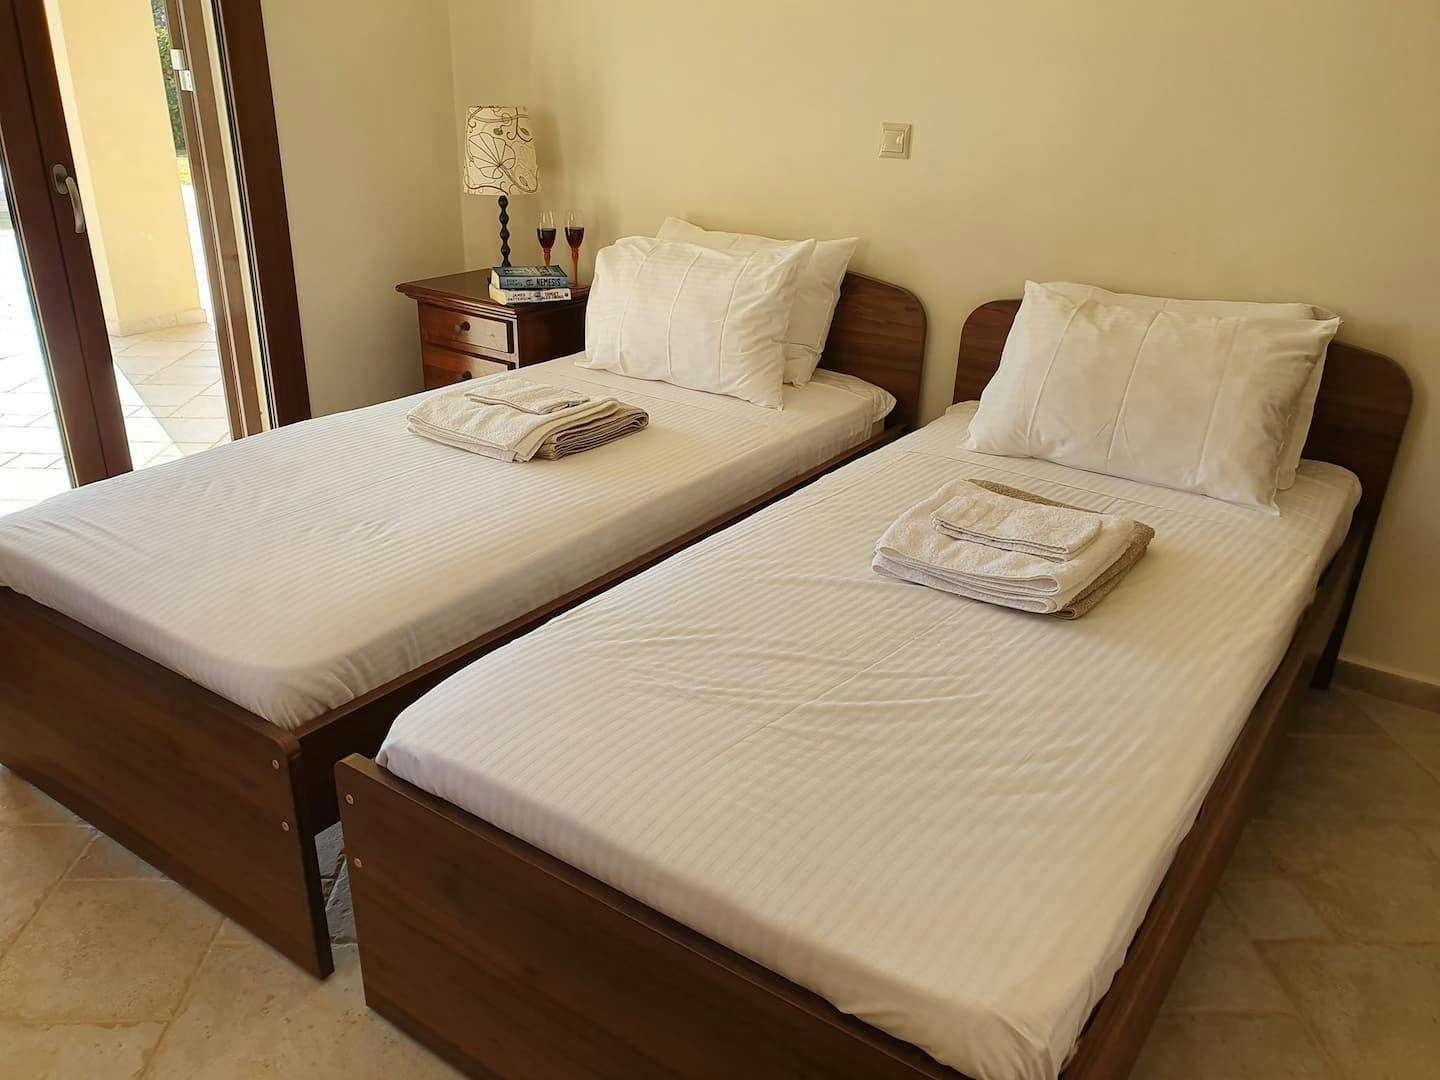 The first bedroom with two single beds and direct access to the pool